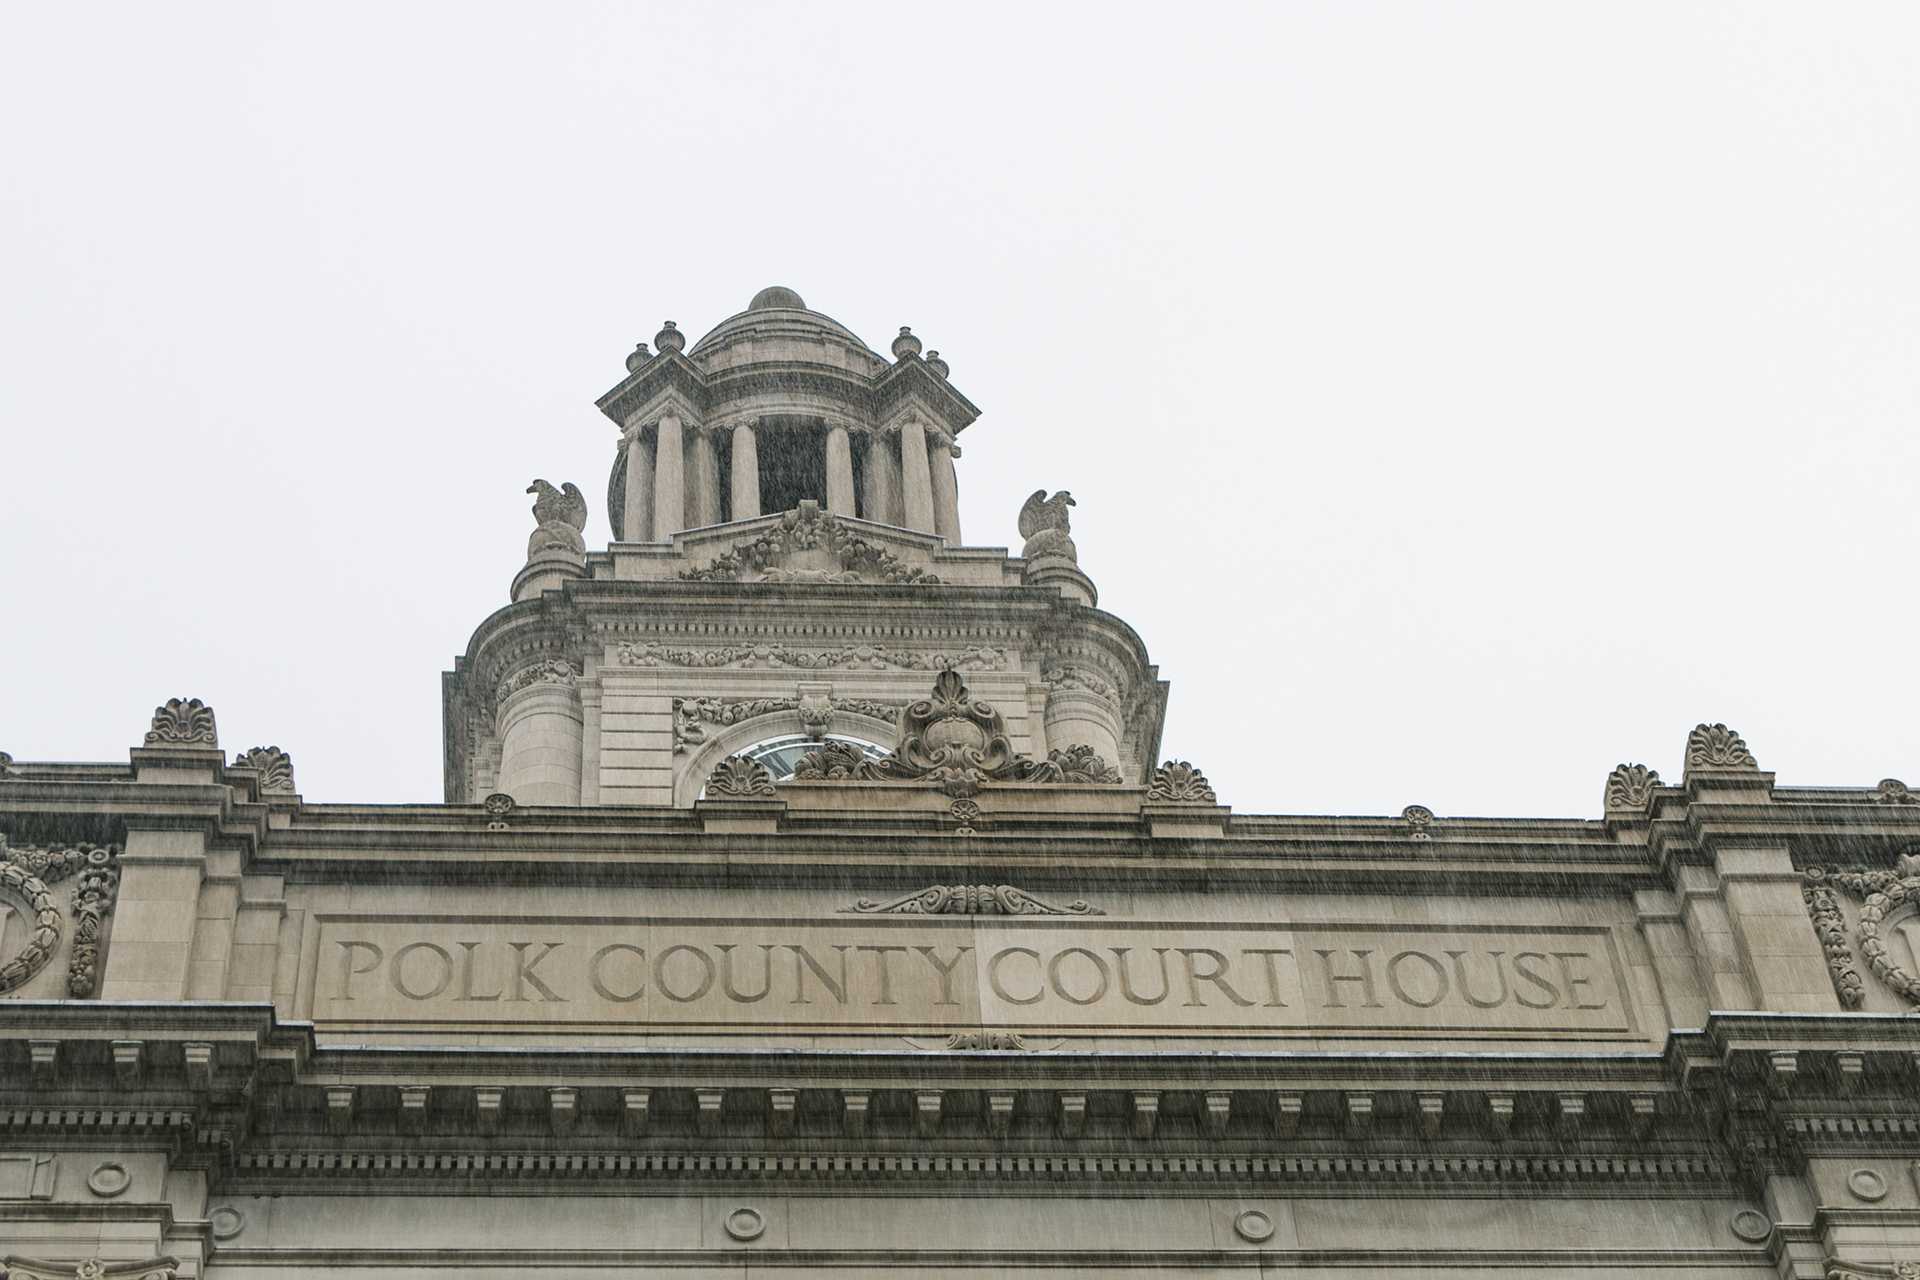 Polk County judge places injunction on new abortion law The Daily Iowan